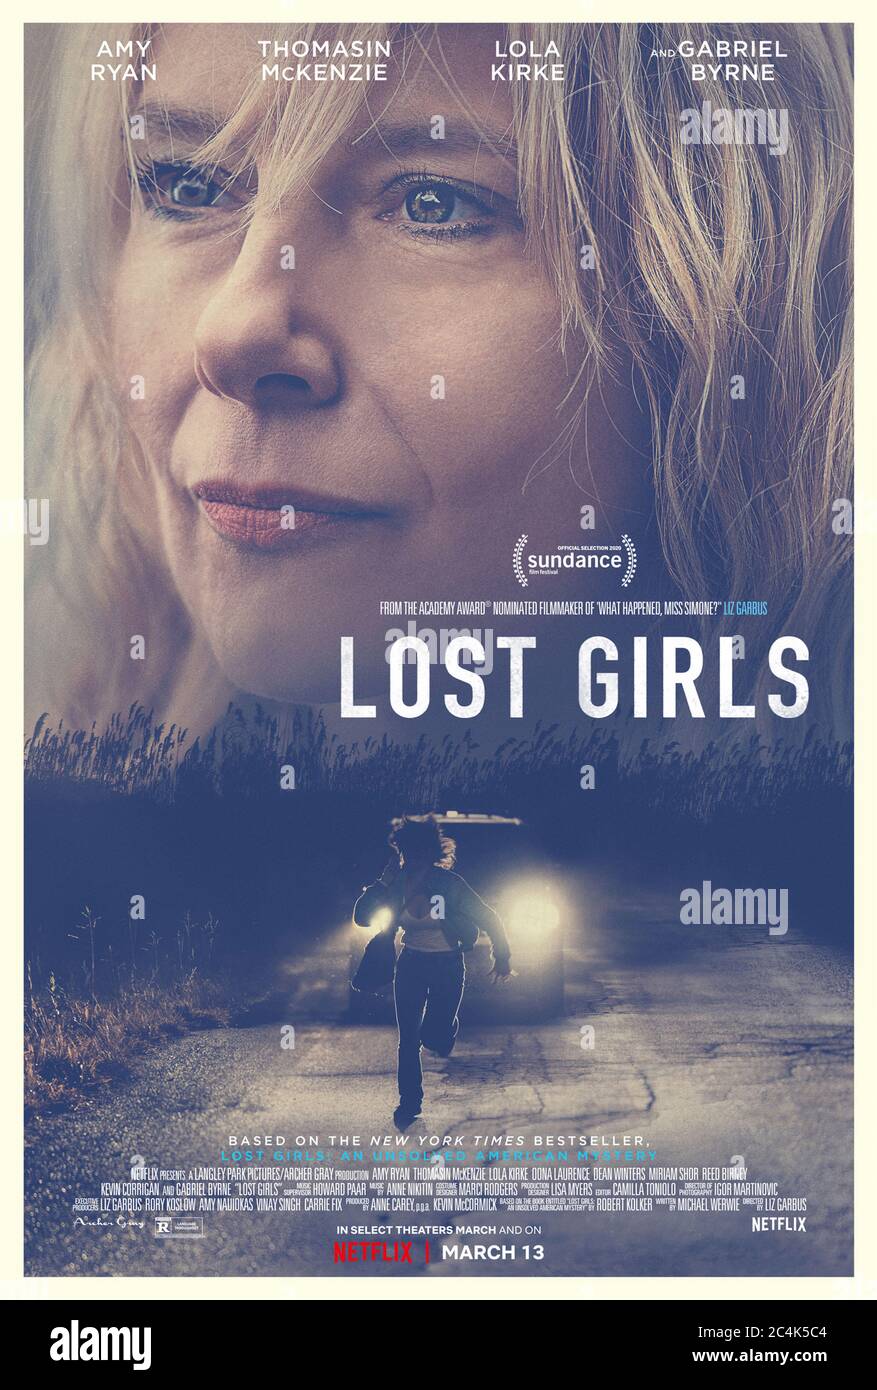 Lost Girls (2020) directed by Liz Garbus and starring Amy Ryan, Thomasin McKenzie and Gabriel Byrne. Big screen adaptation of Robert Kolker's novel about the Long Island serial killer. Stock Photo